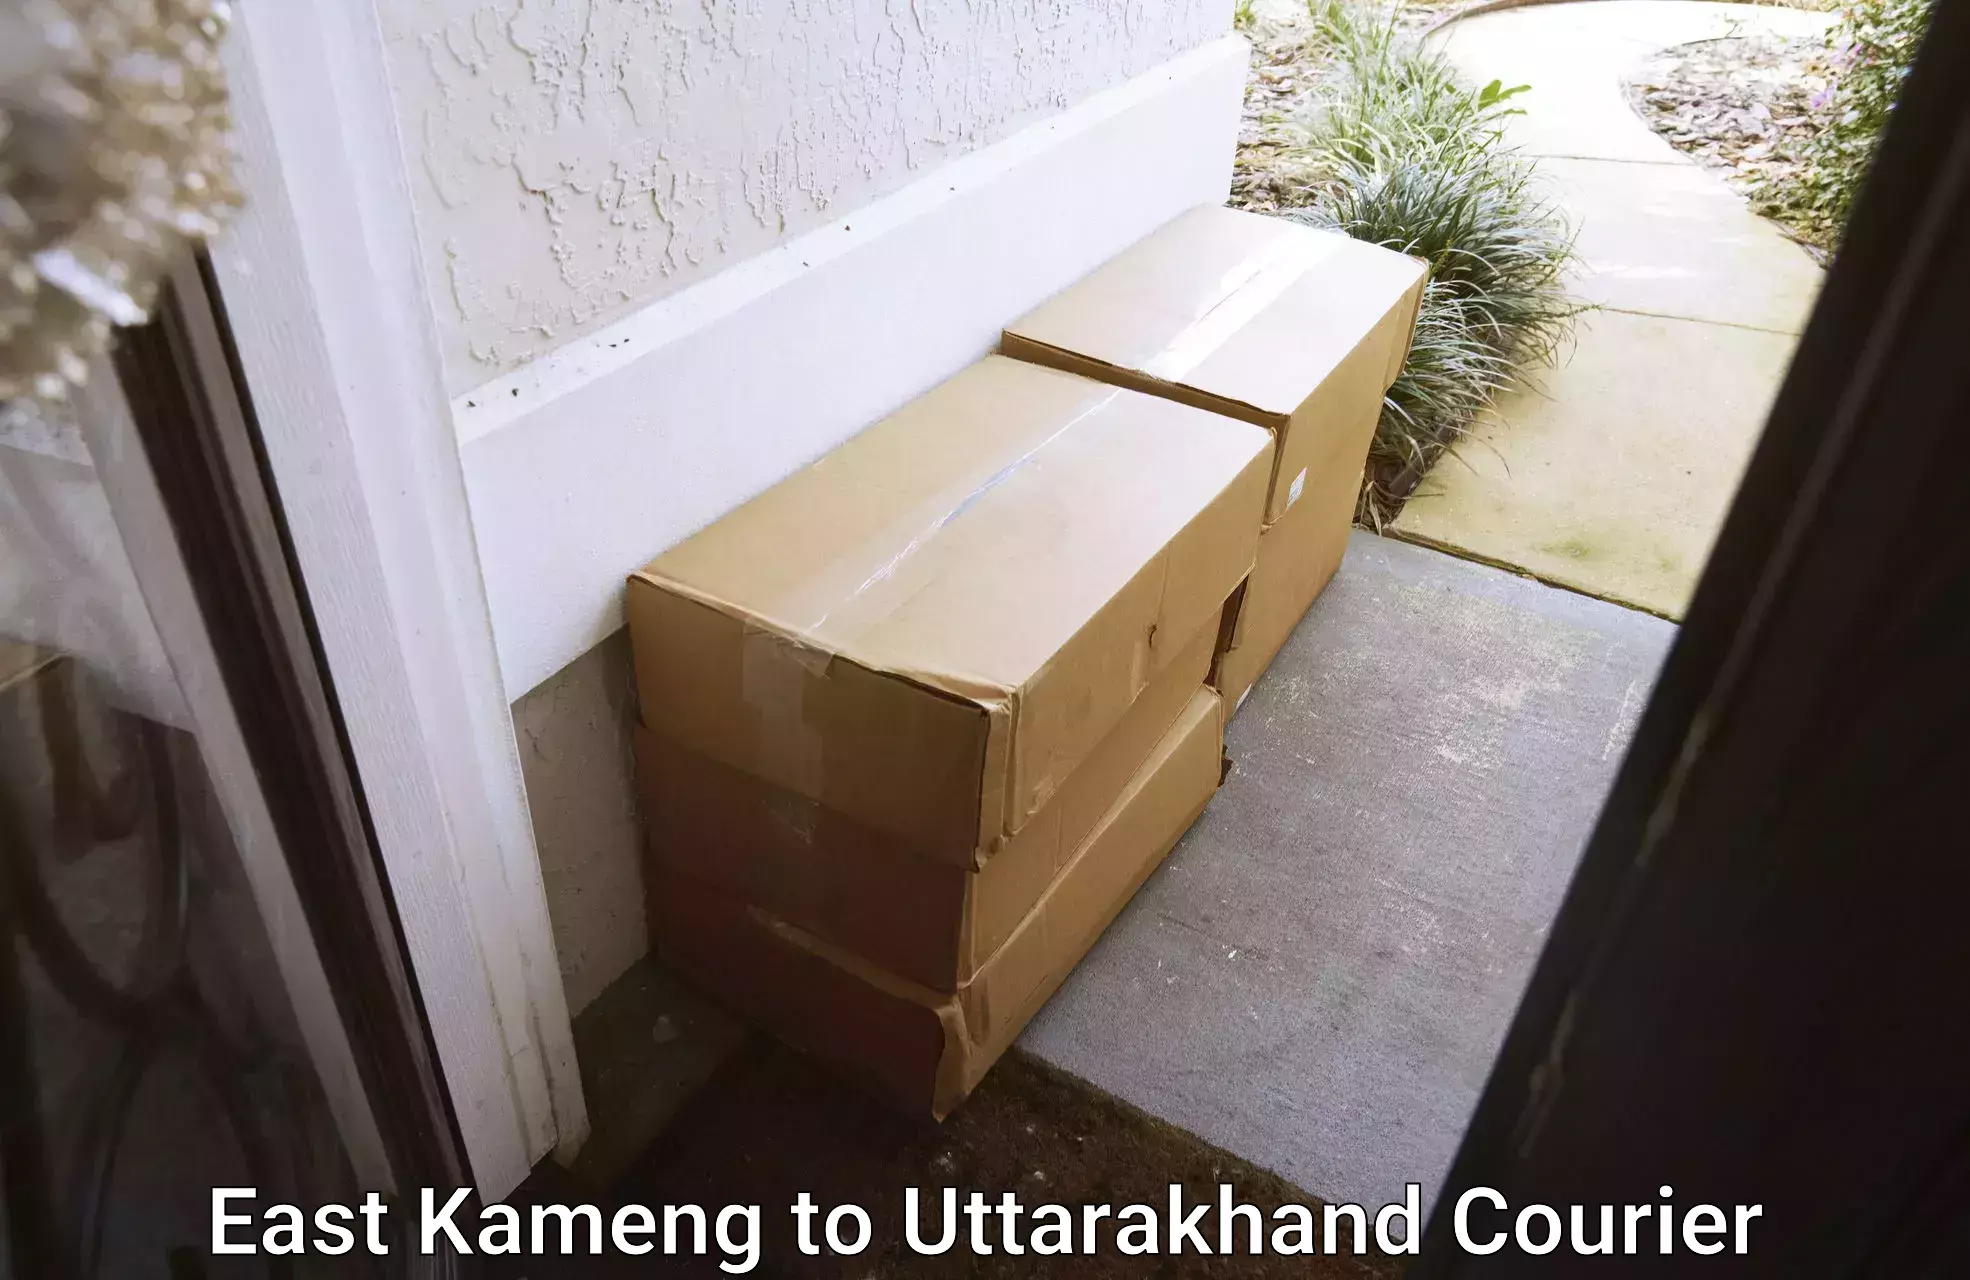 Automated parcel services East Kameng to Baijnath Bageshwar